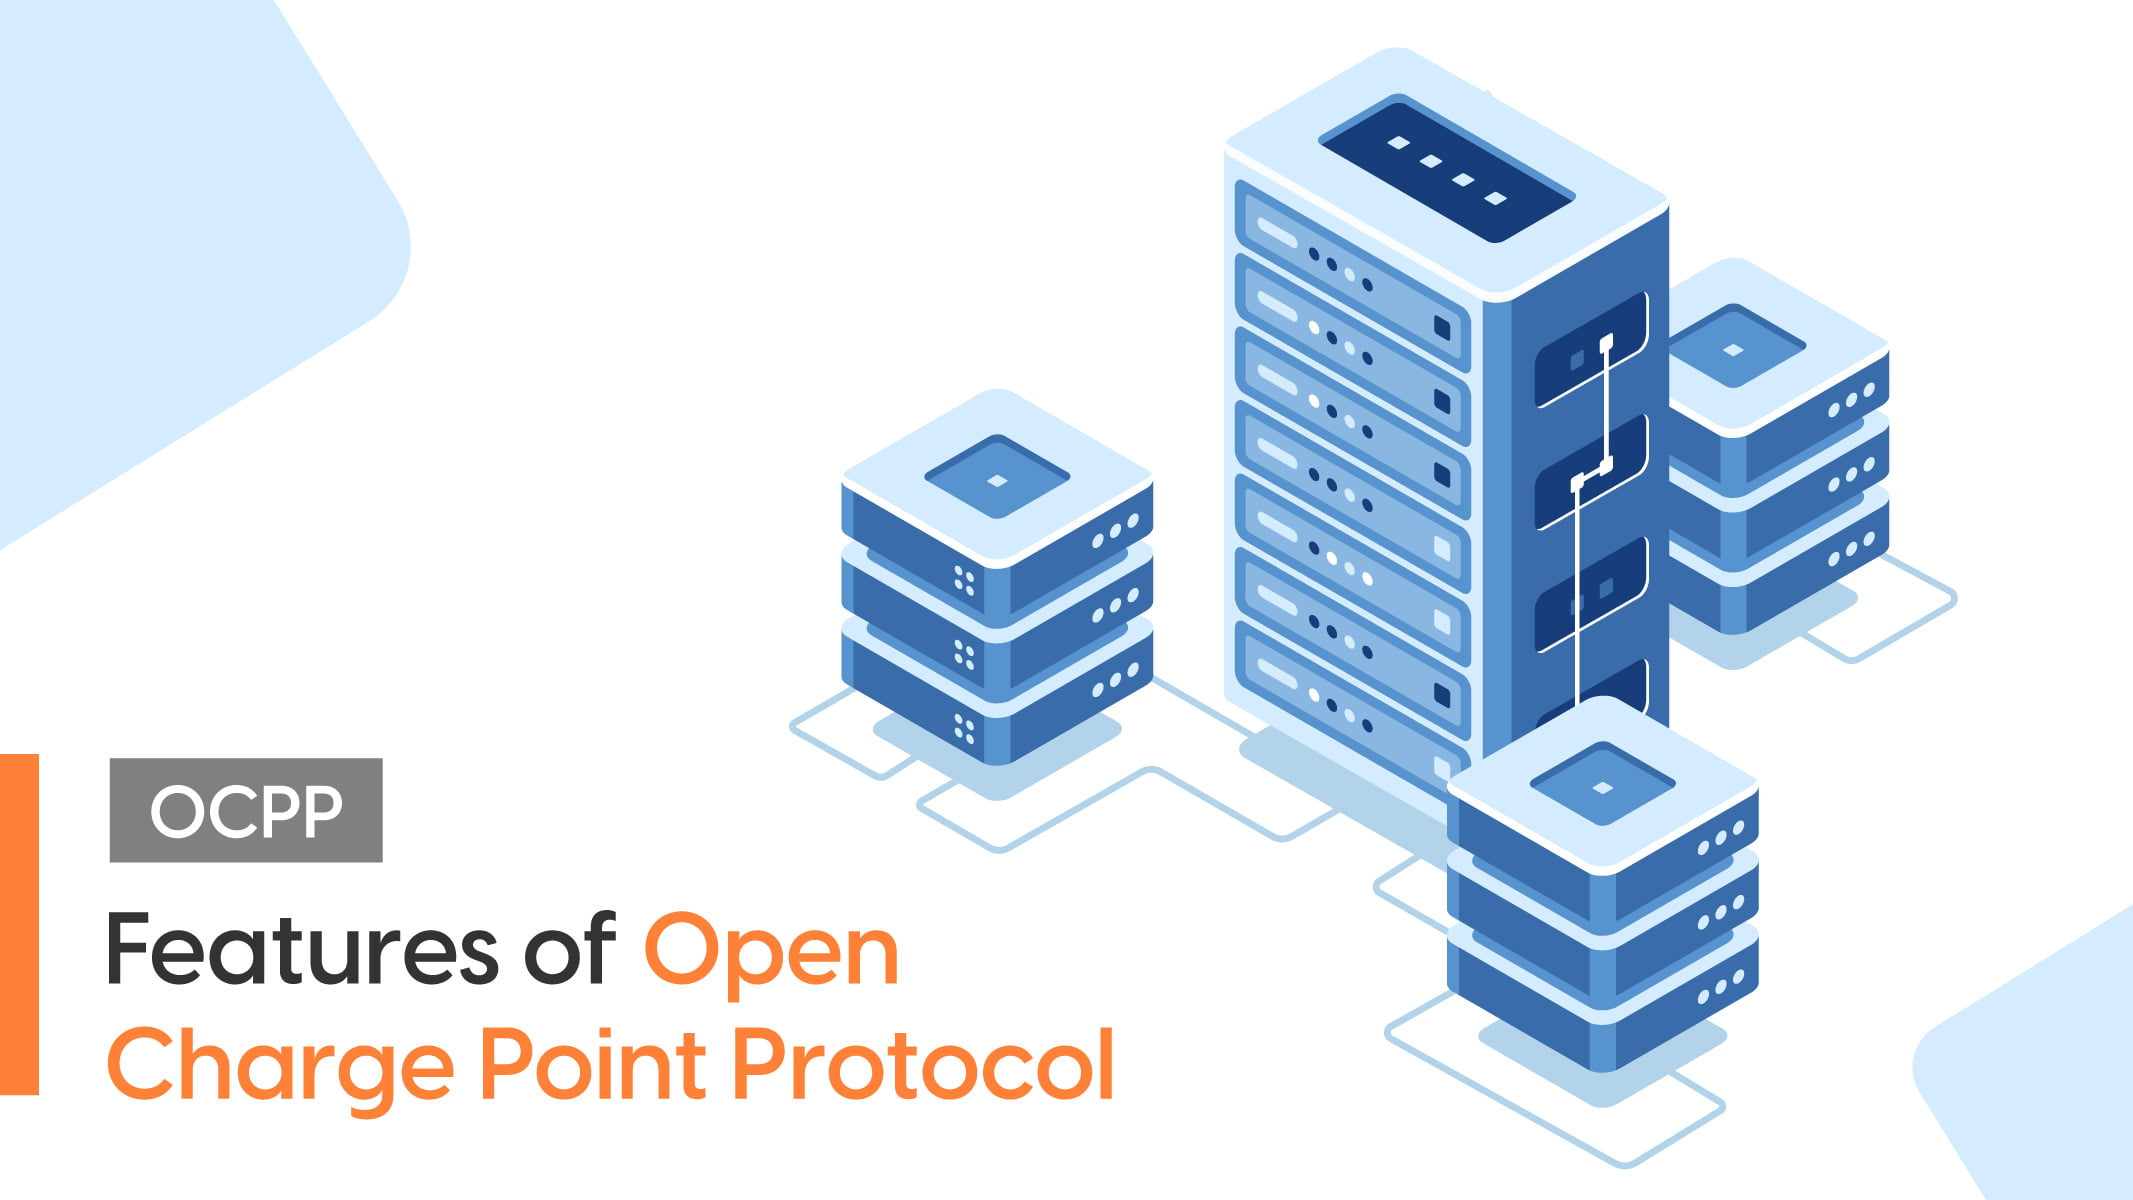 Features of Open Charge Point Protocol